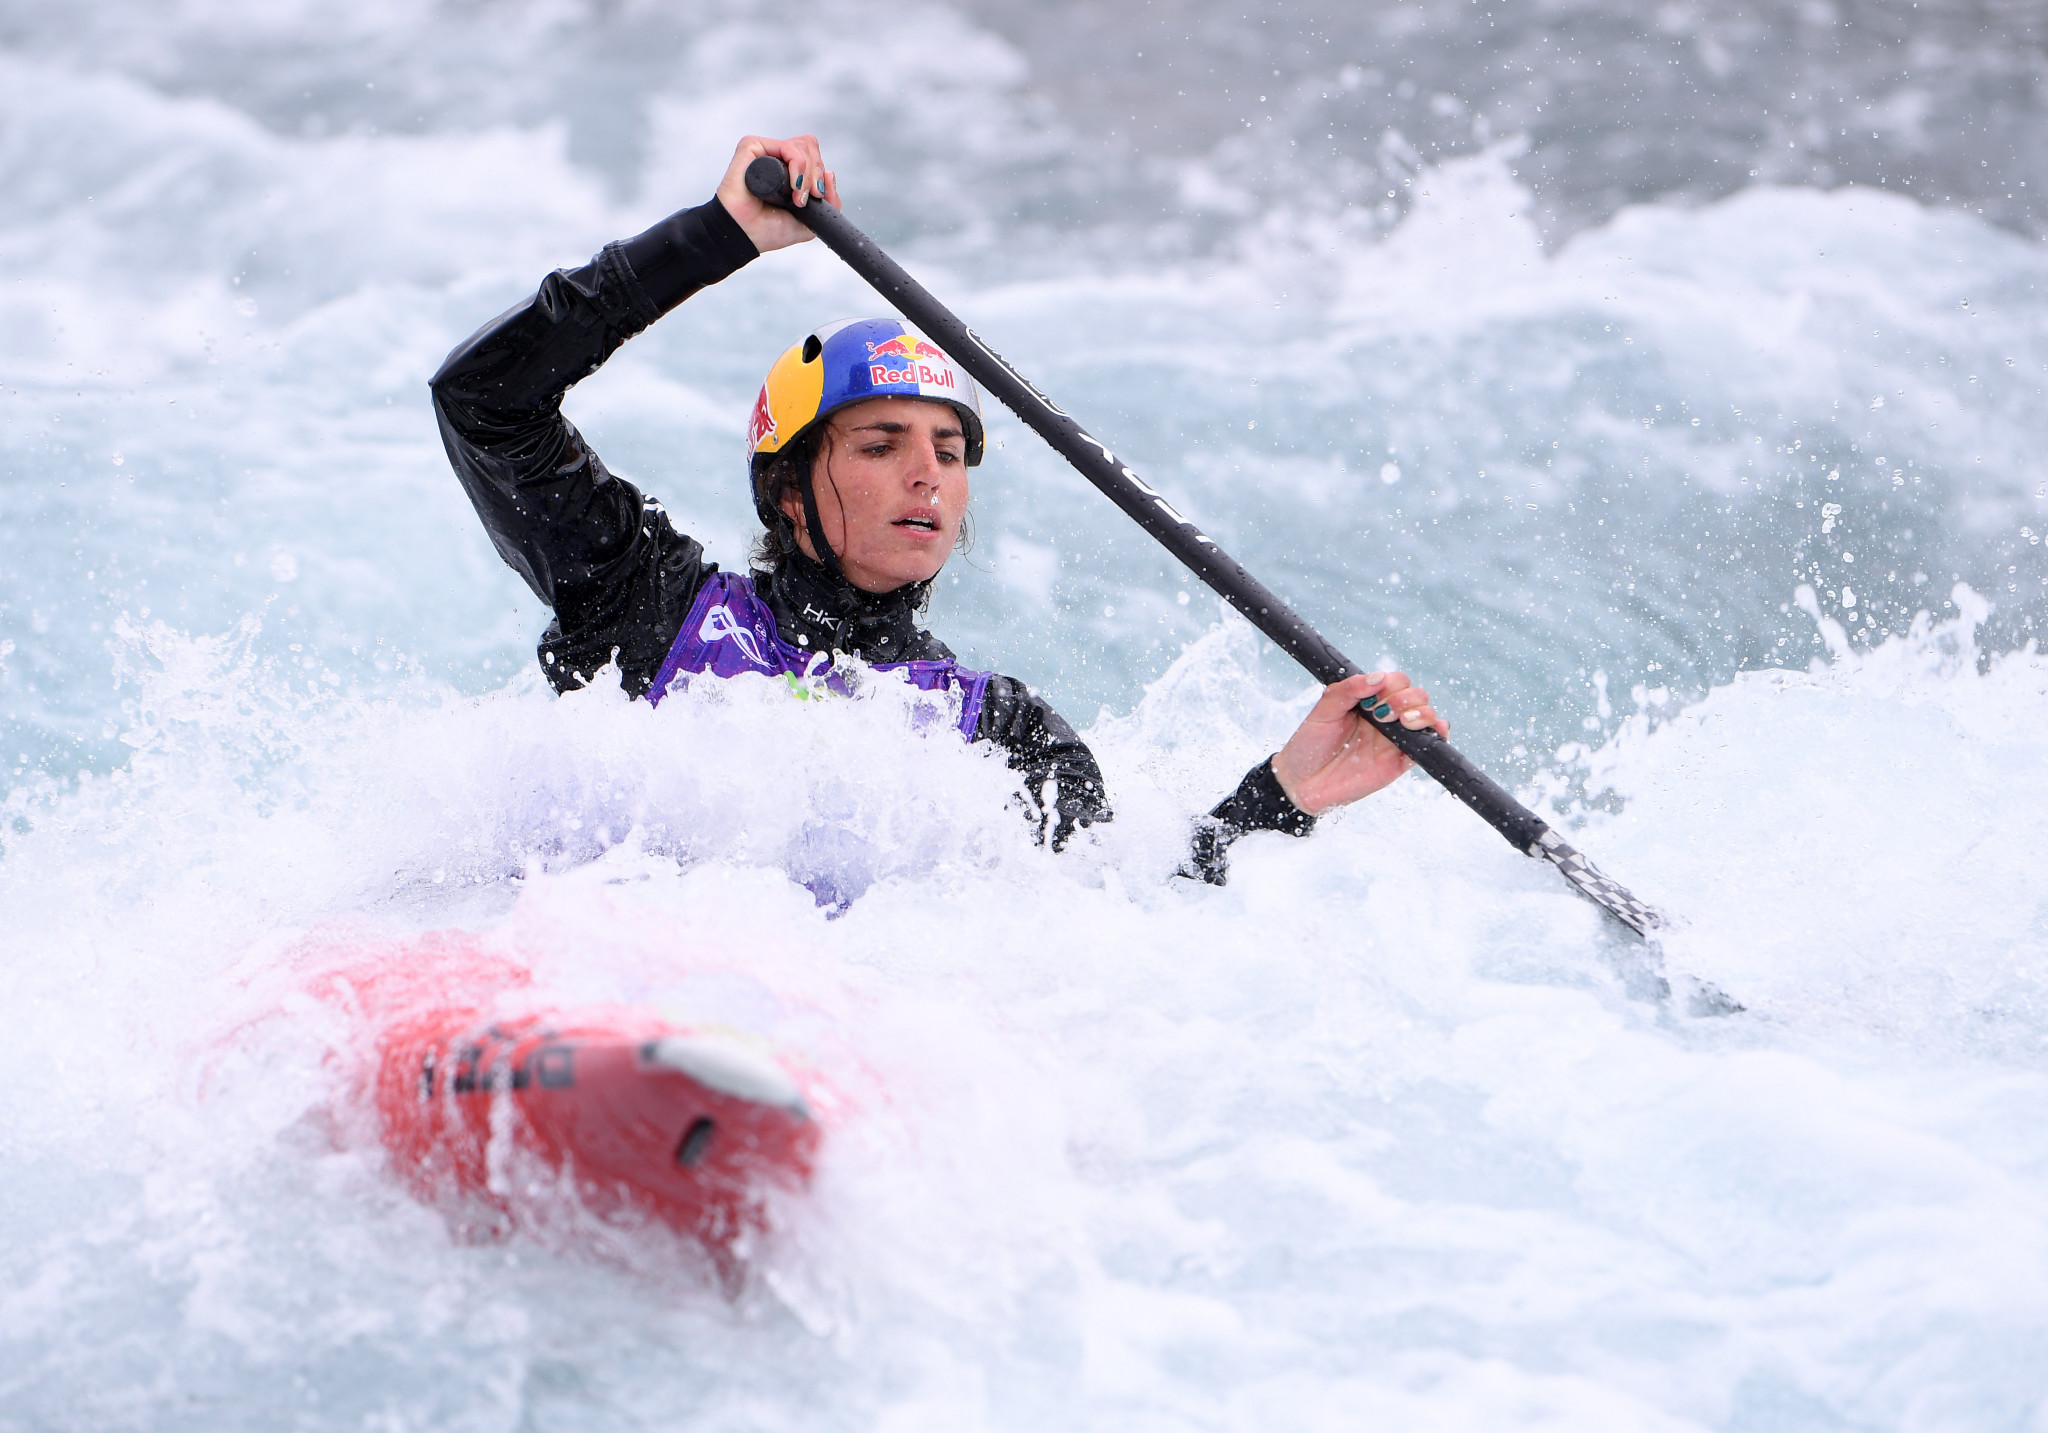 Fox and Beňuš clinch overall titles with victory at ICF Canoe Slalom World Cup final